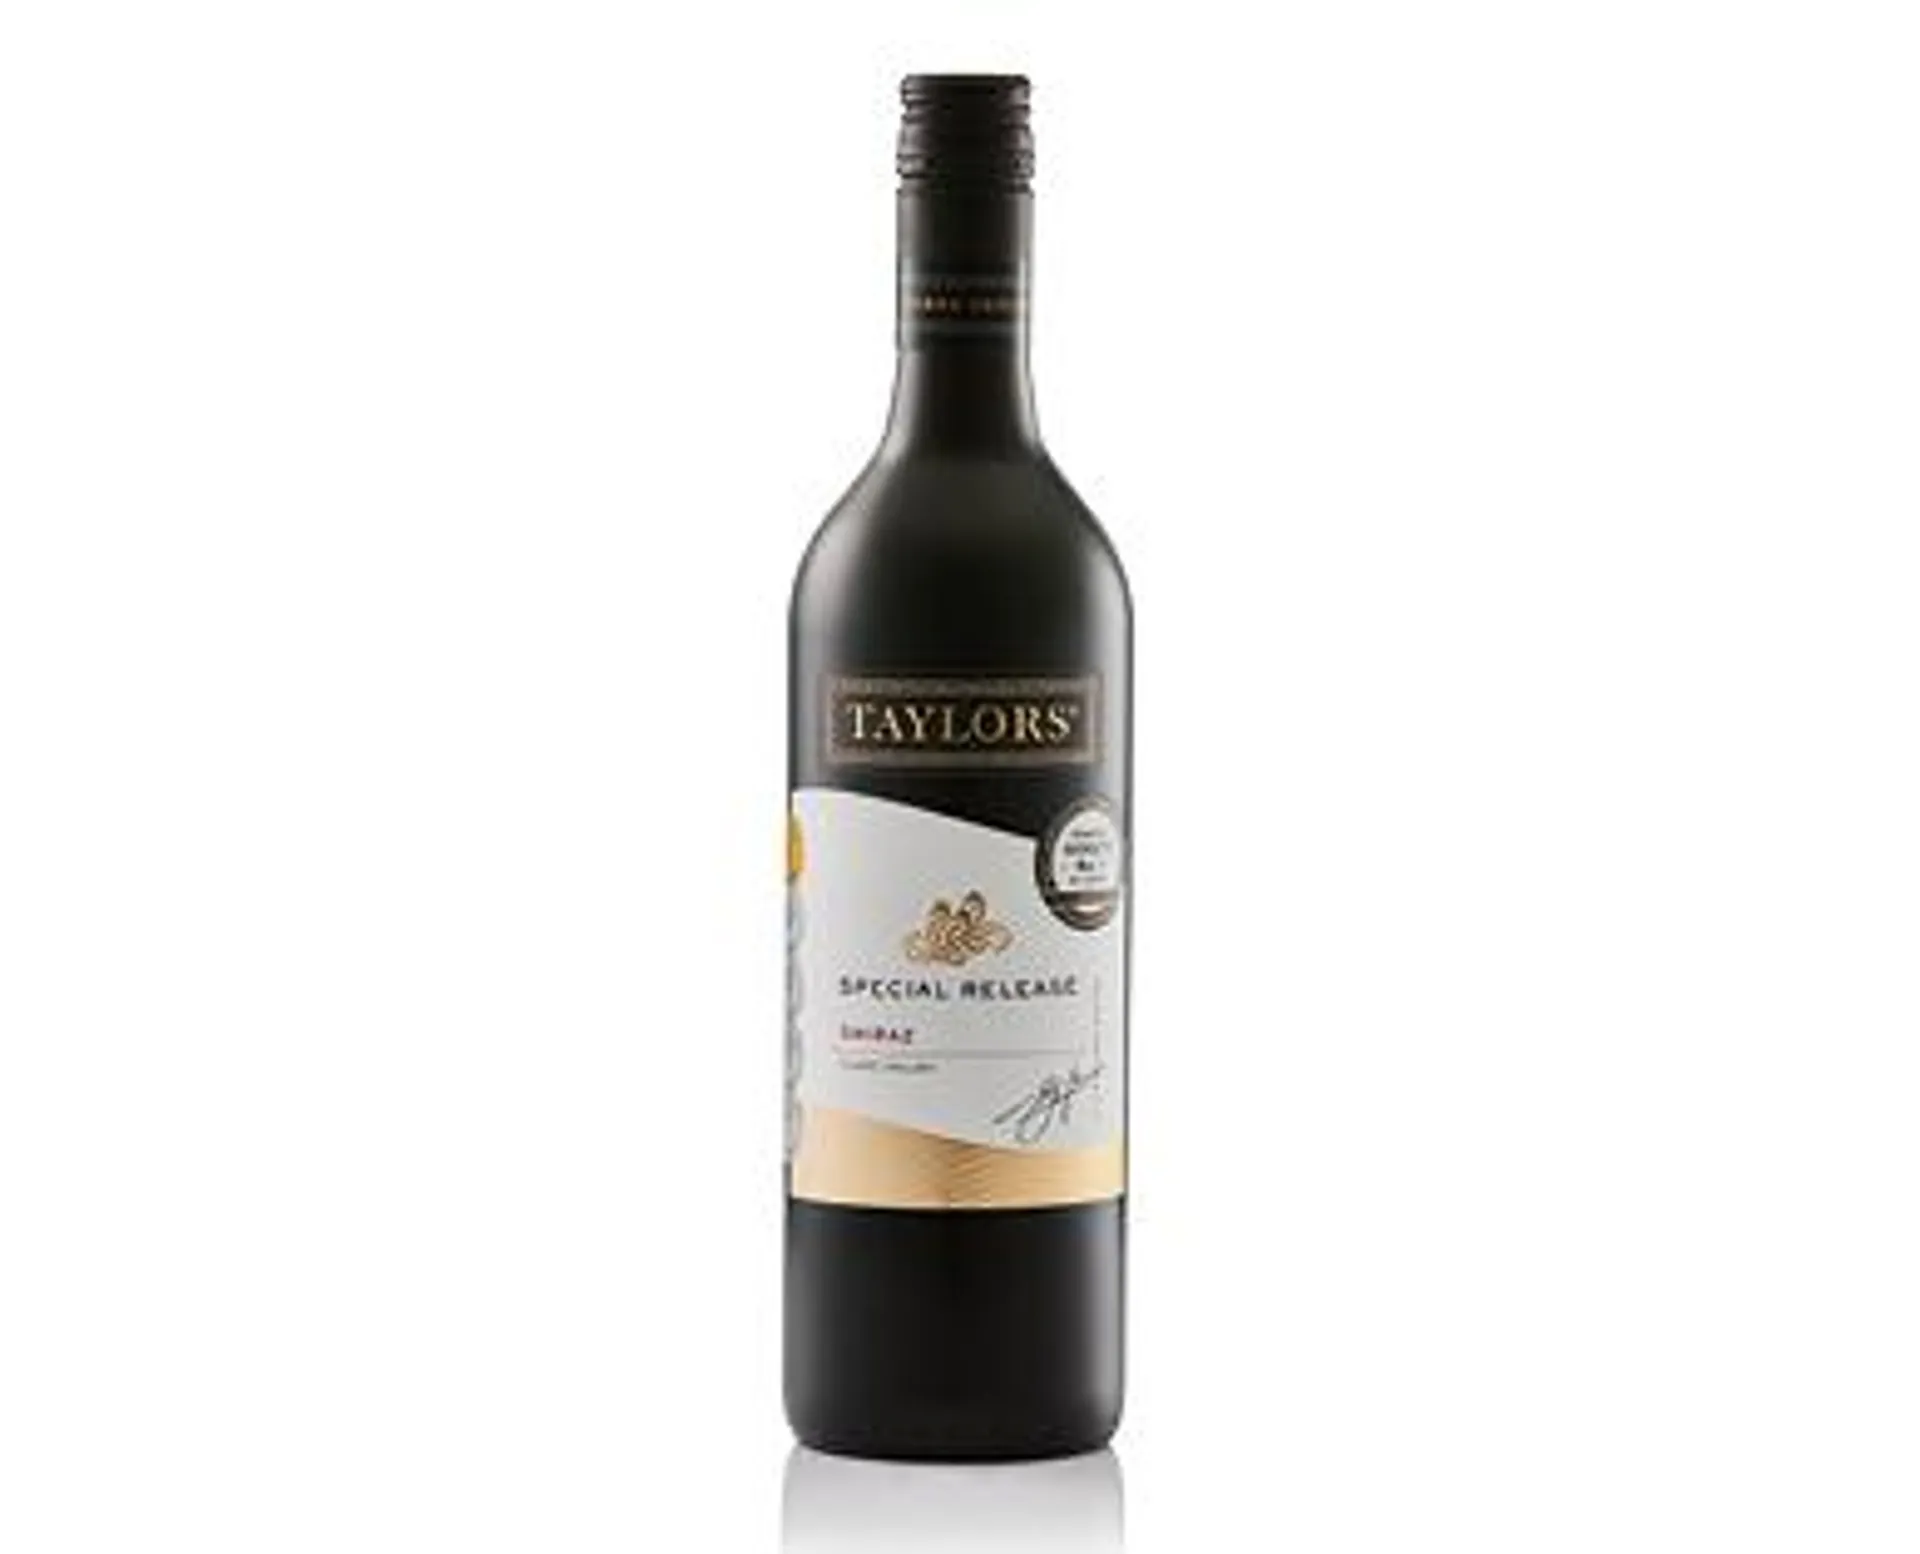 Taylors Special Release Clare Valley Shiraz 750ml